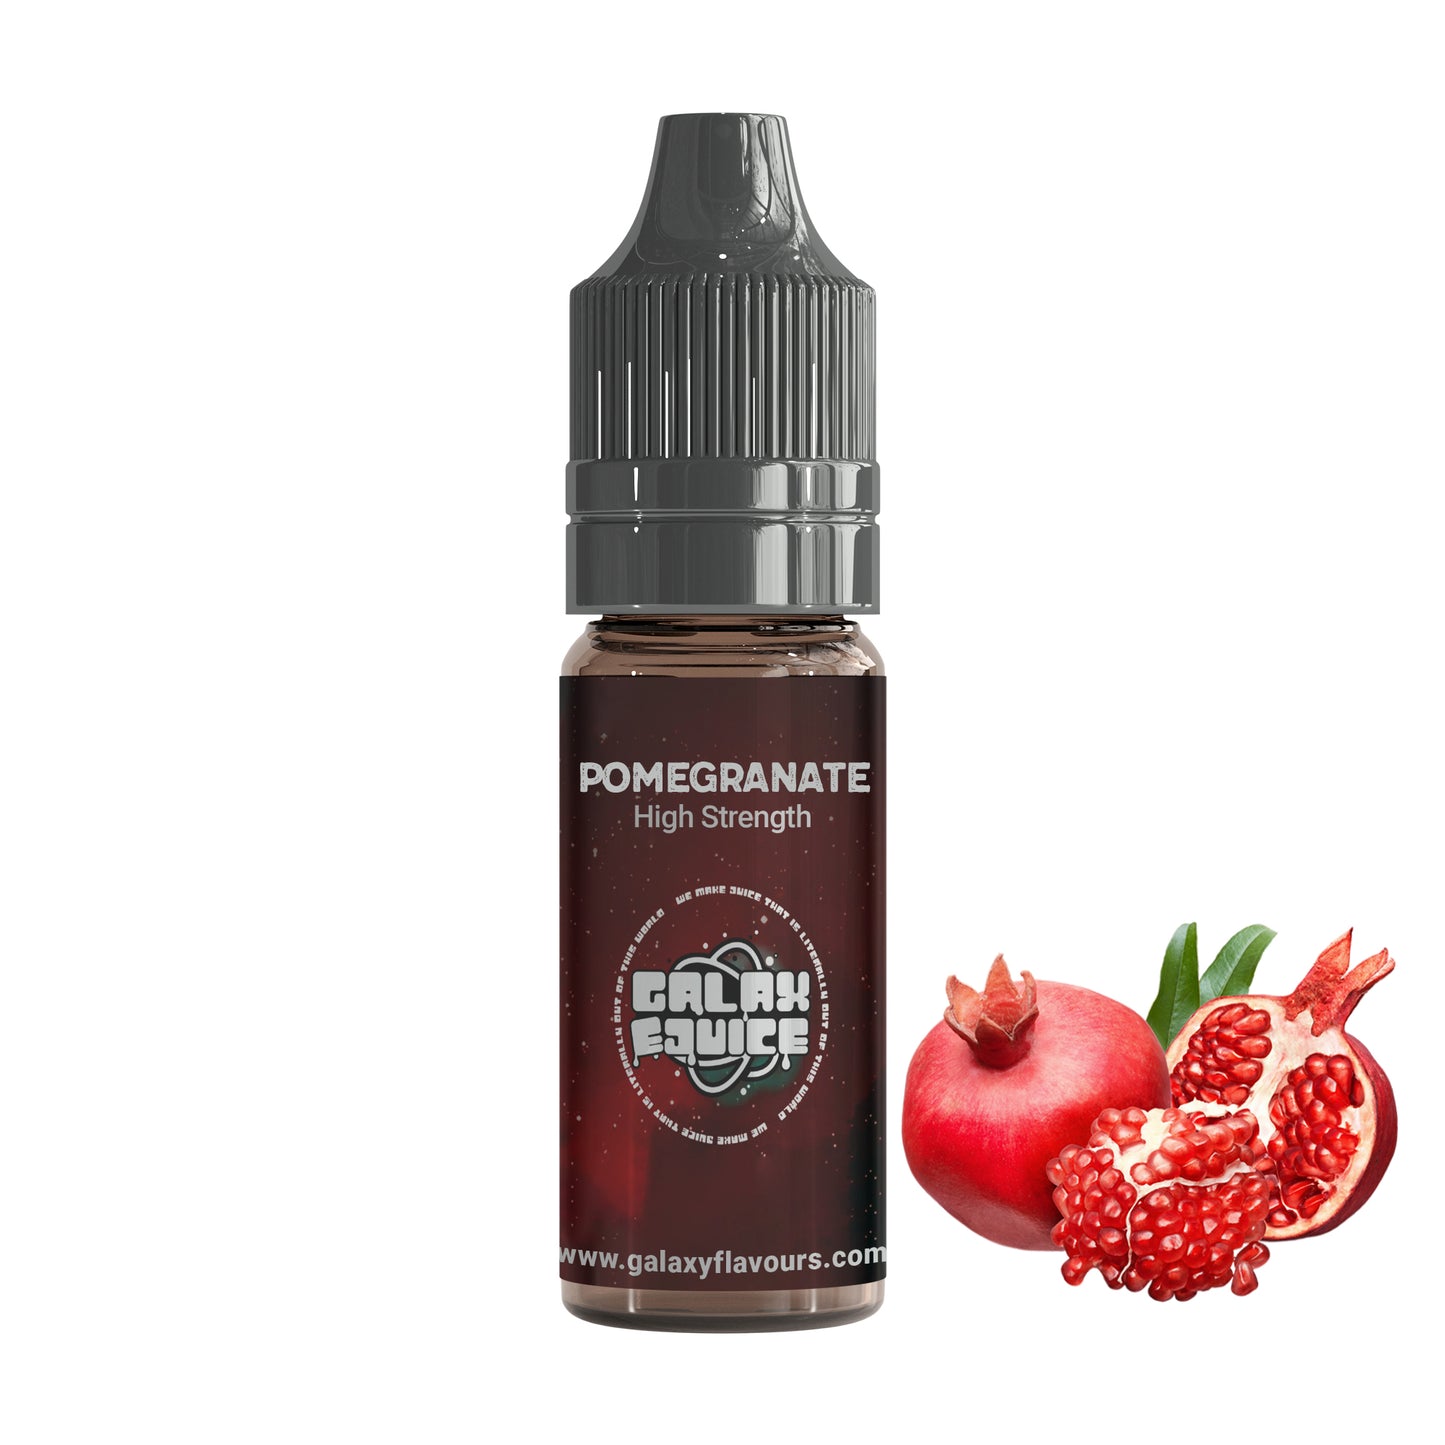 Pomegranate High Strength Professional Flavouring.